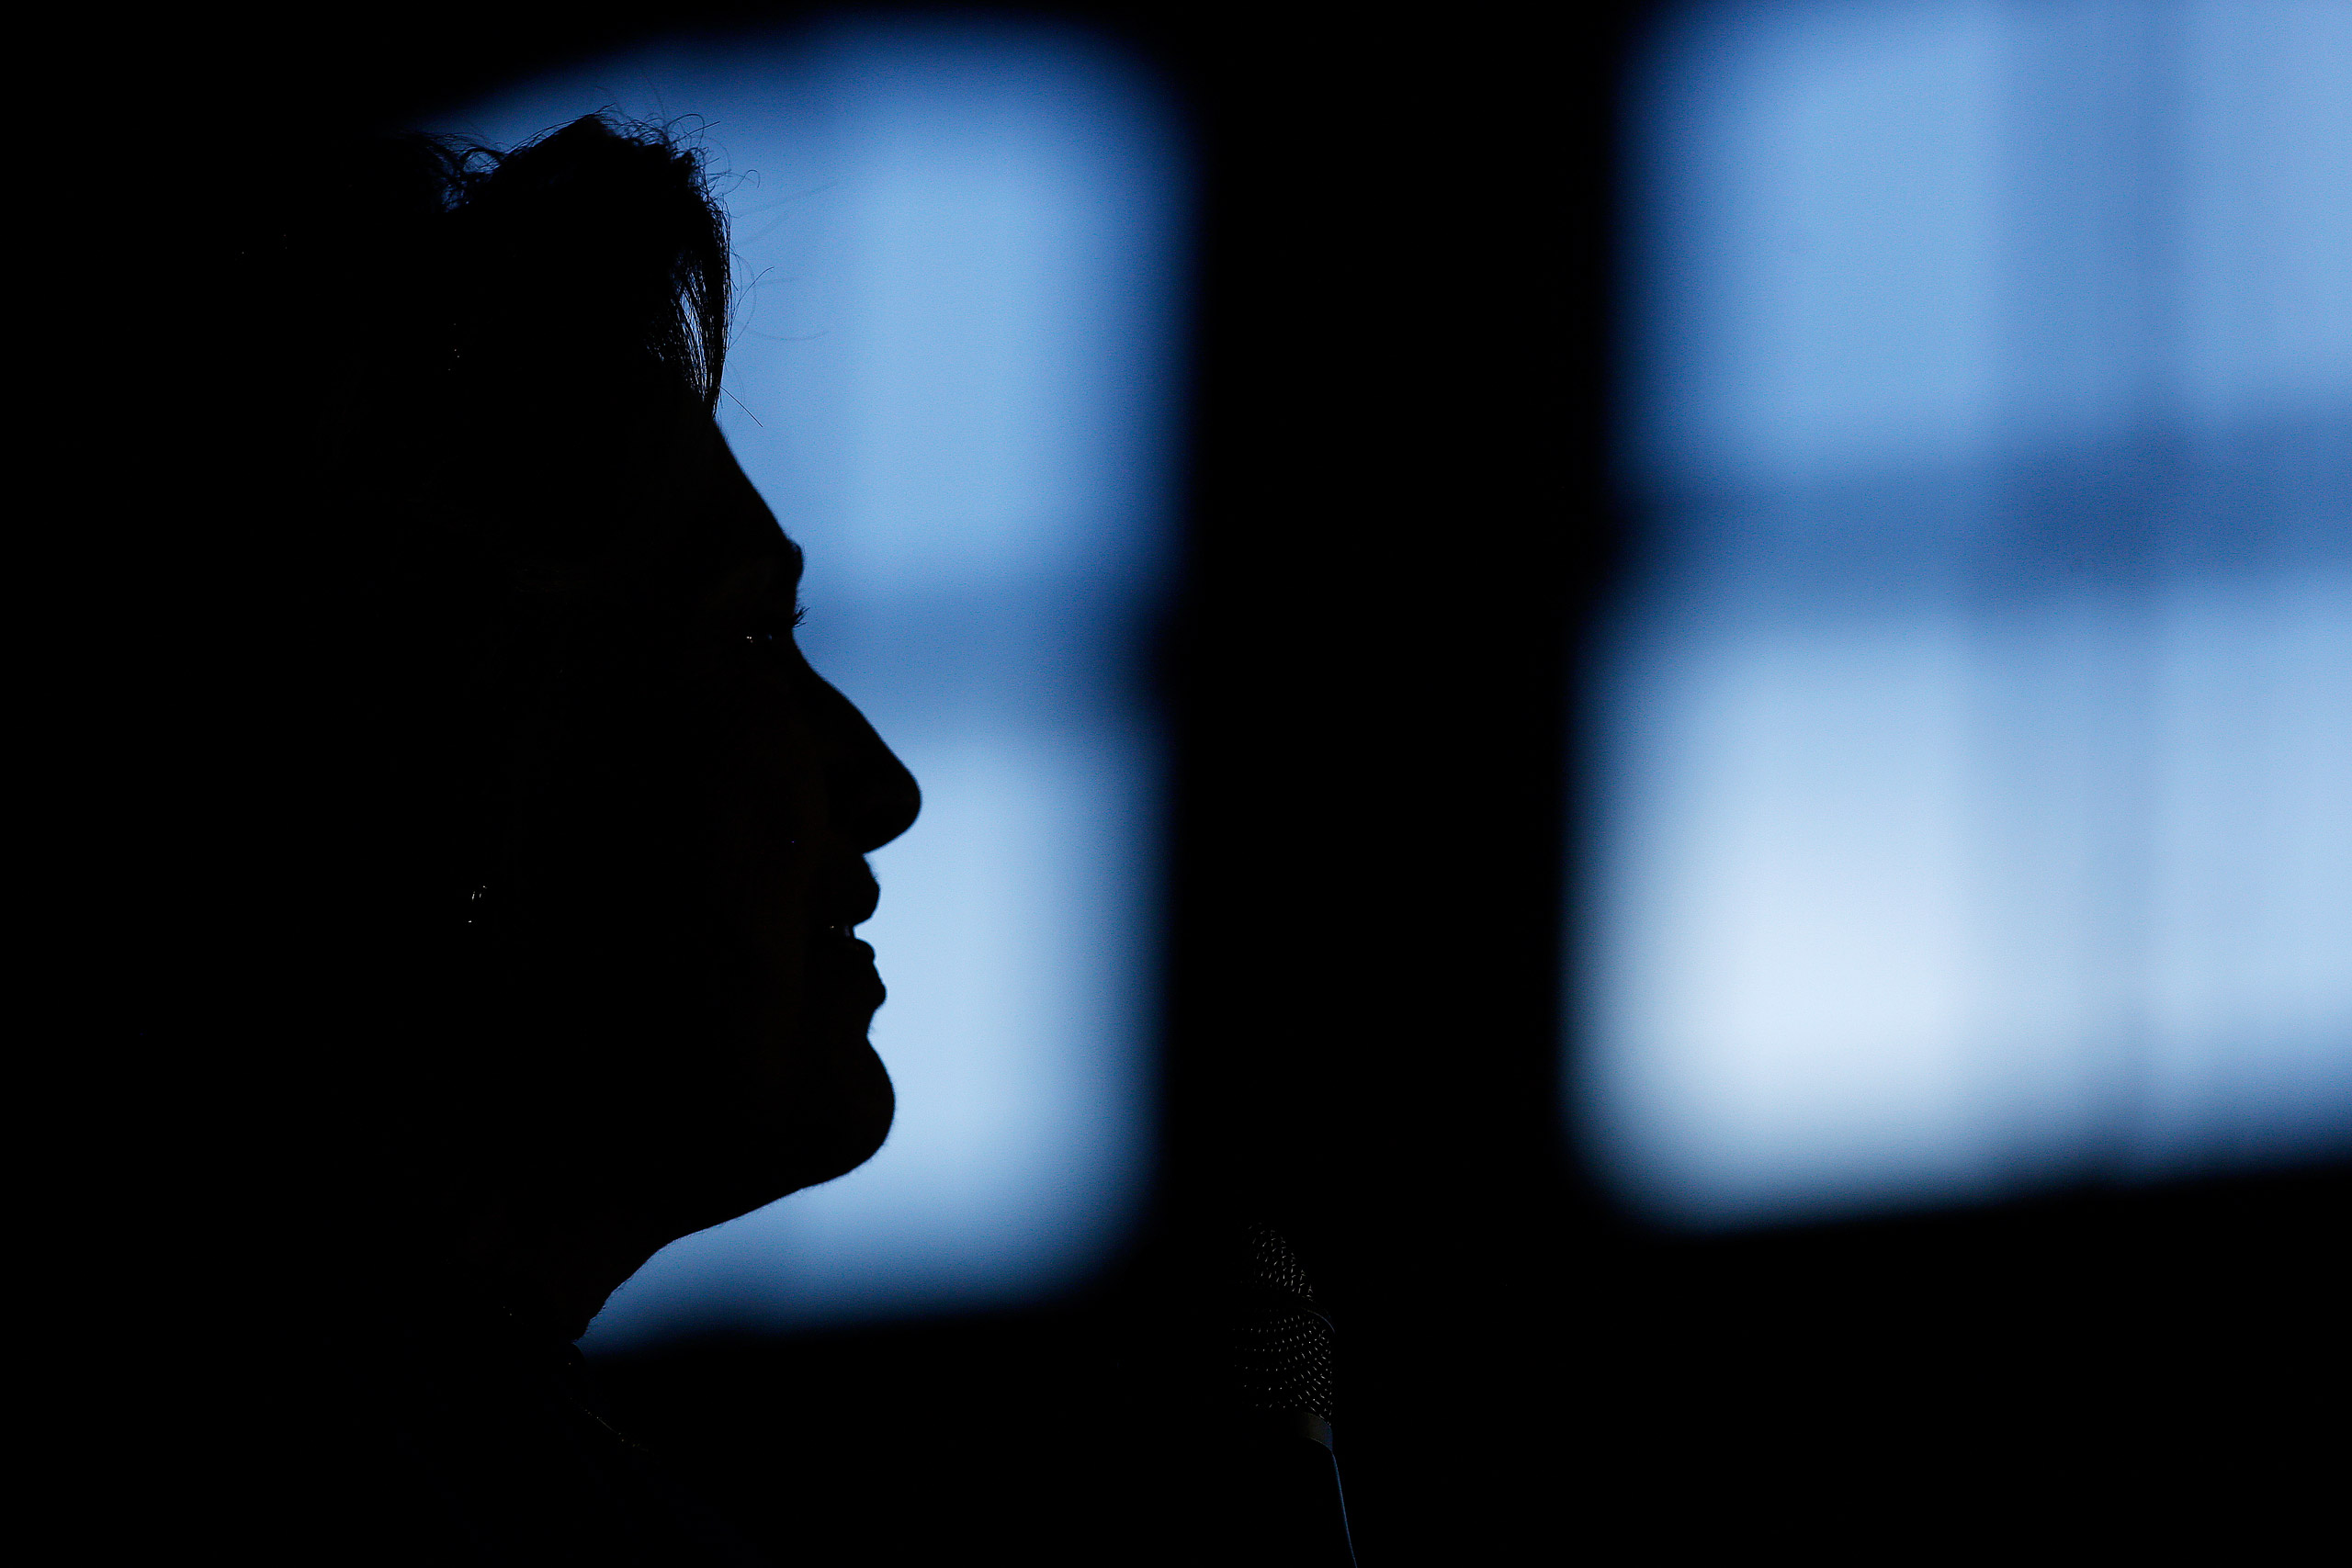 The silhouette of Hillary Clinton, former Secretary of State and 2016 Democratic presidential candidate, is seen during a campaign event in Louisville, Ky., on May 10, 2016. (Luke Sharrett—Bloomberg/Getty Images)